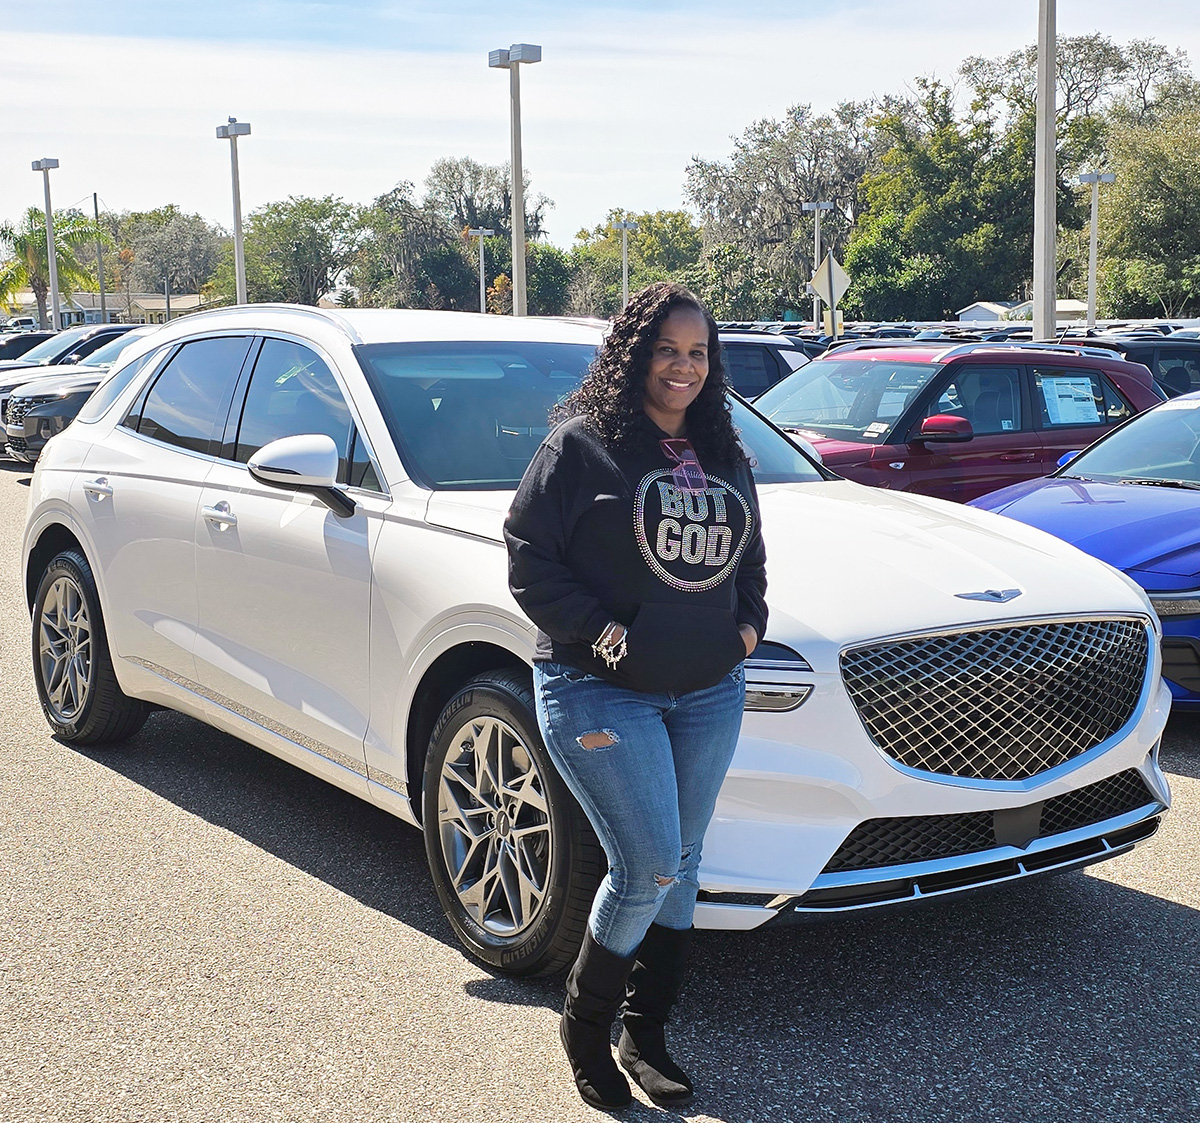 Of course #WeLoveReferrals at #LakelandGenesis & when Tenikka Williams was searching for a #NewSUV, it was the #GV70 that was everything she was looking for & salesperson #LuSantacruz made sure it was the #PerfectOne with #ExceptionalService - #Congratulations & #ThankYou Tenikka